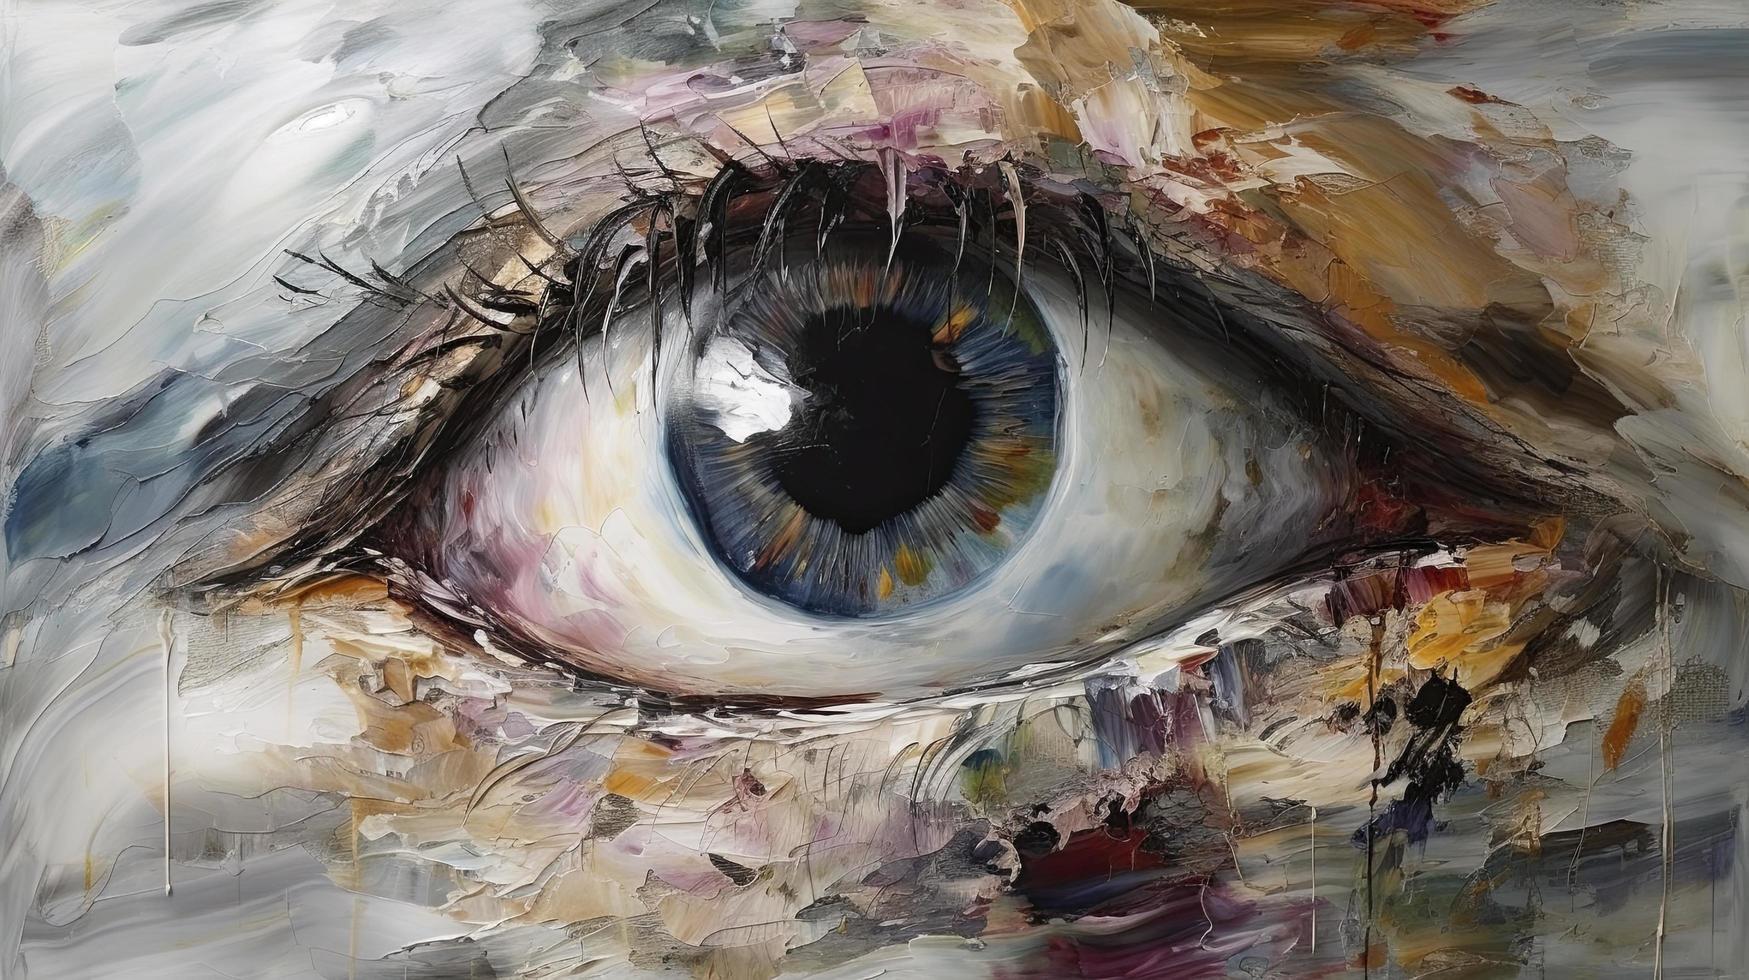 Oil painting. Conceptual abstract picture of the eye. Oil painting in colorful colors, Generate Ai photo